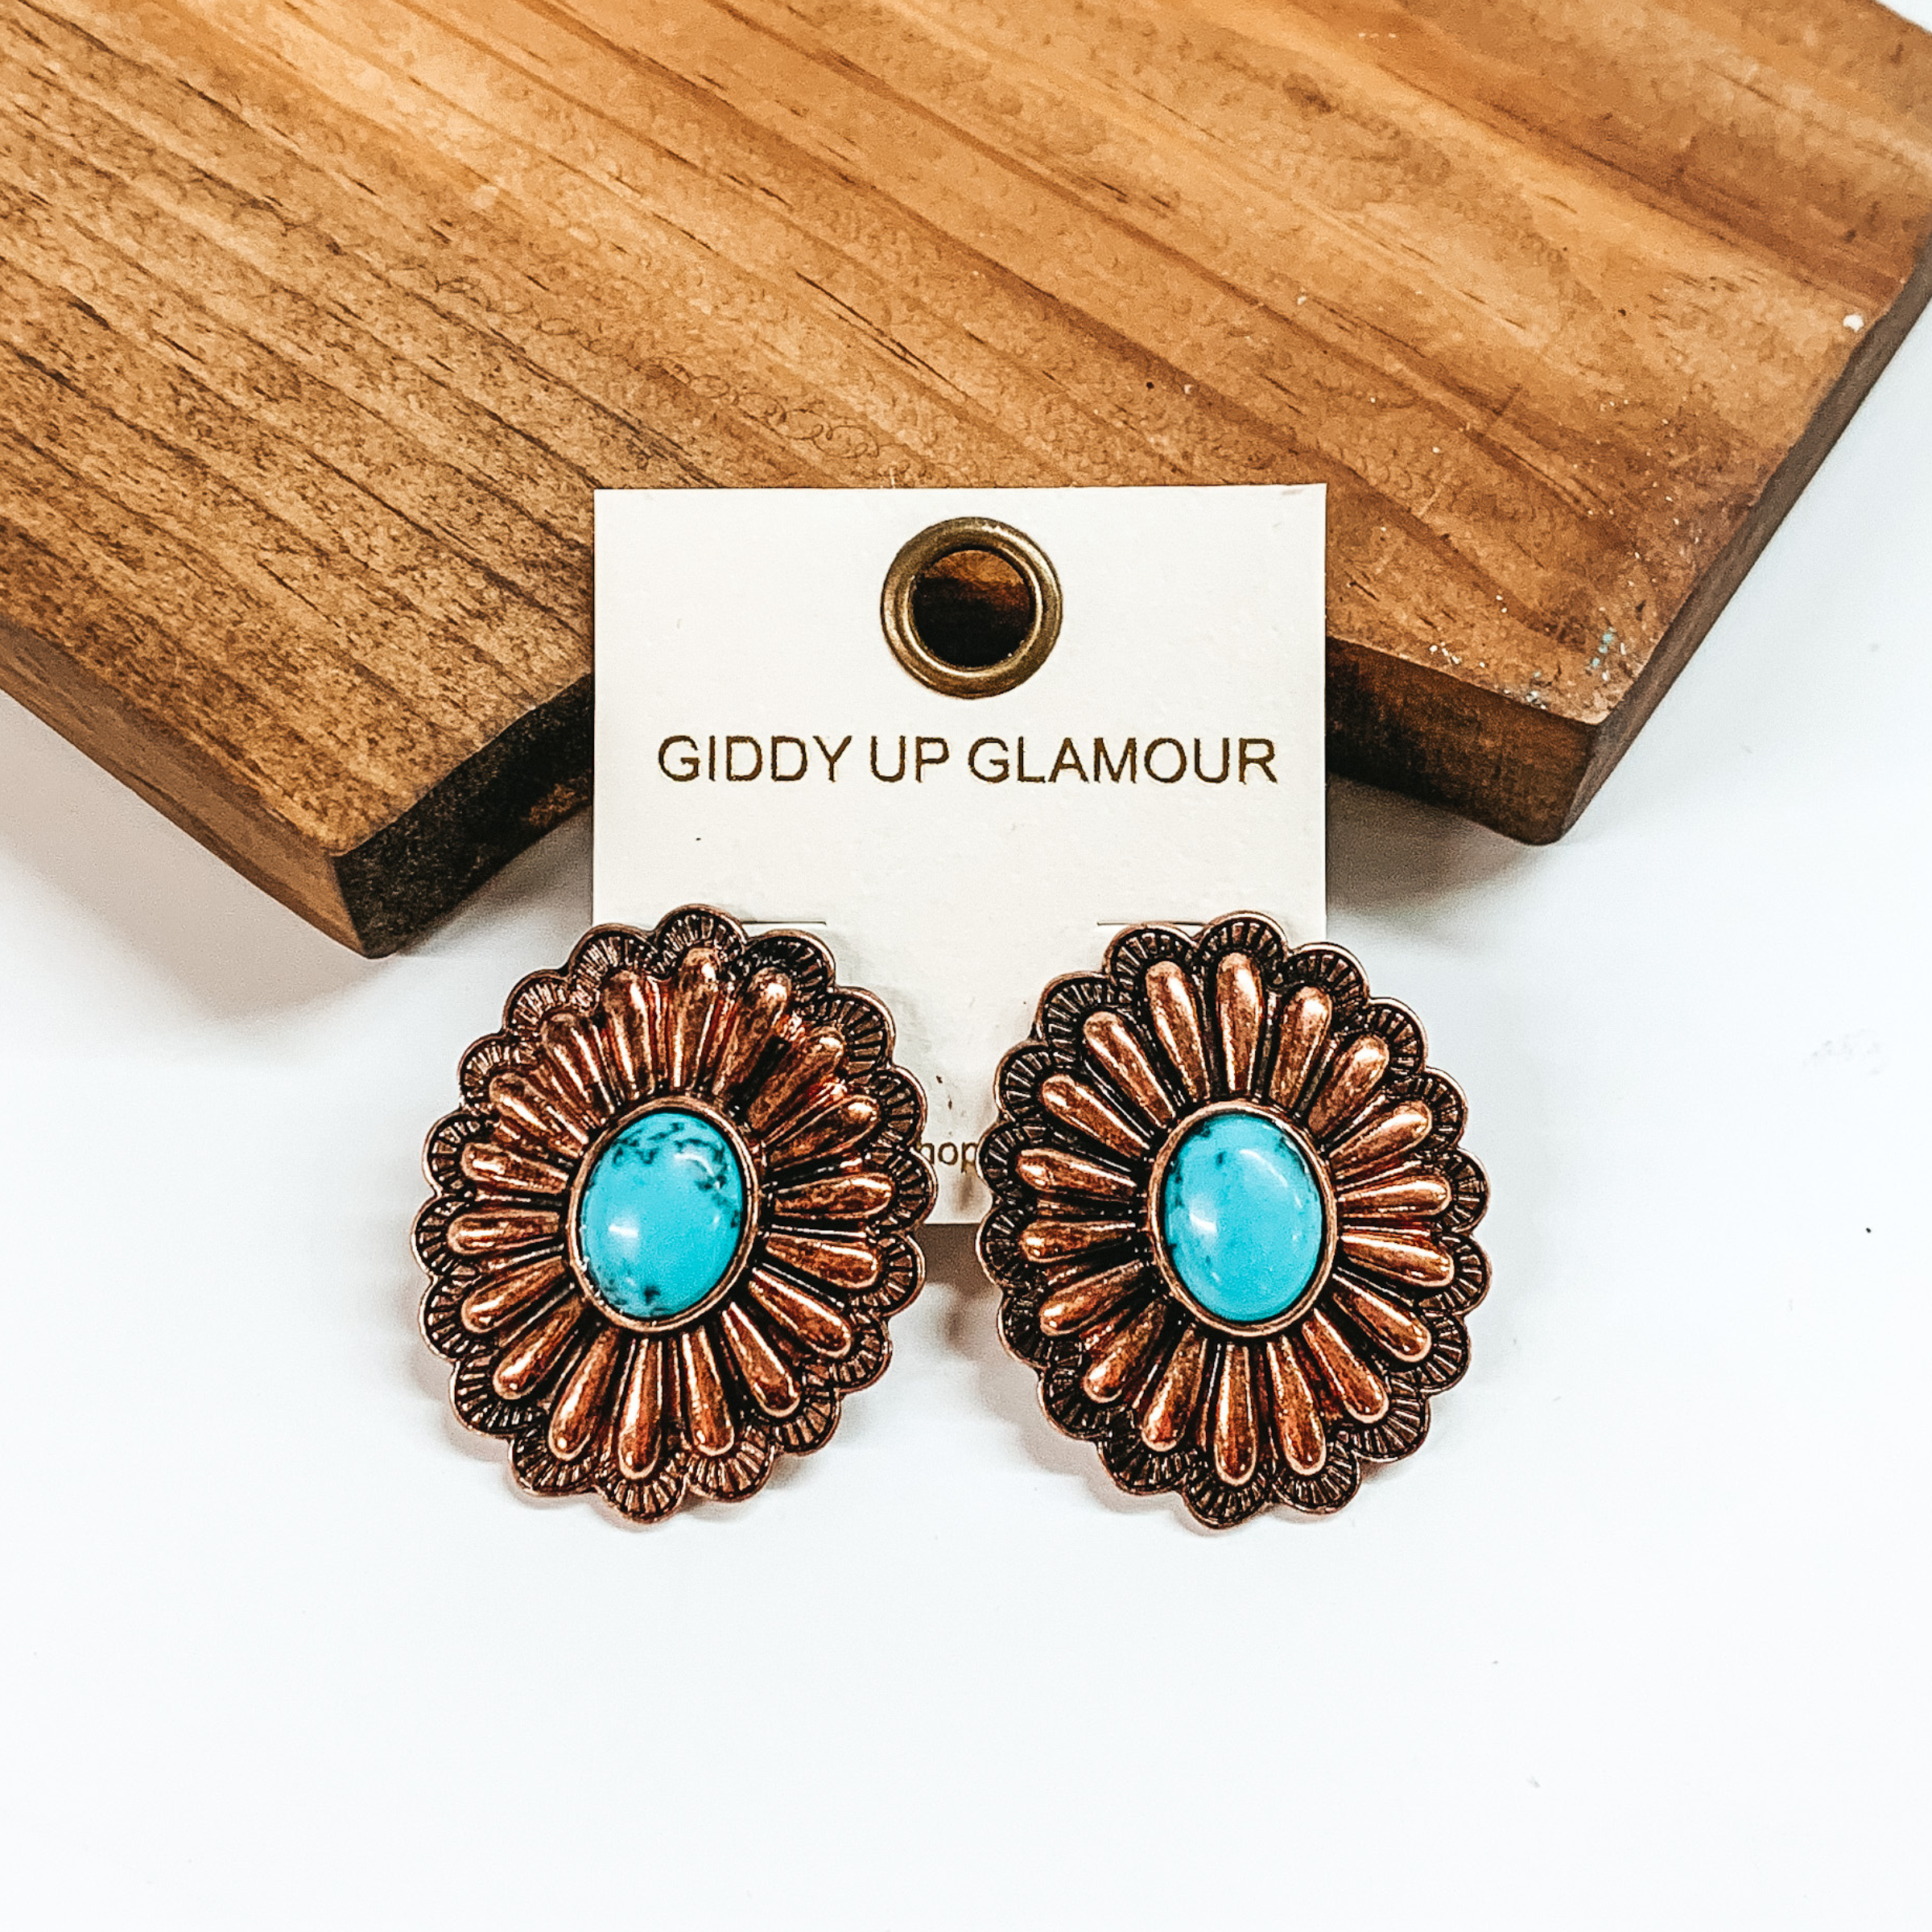 Copper Tone Concho Earrings with Faux Center Stone in Turquoise - Giddy Up Glamour Boutique